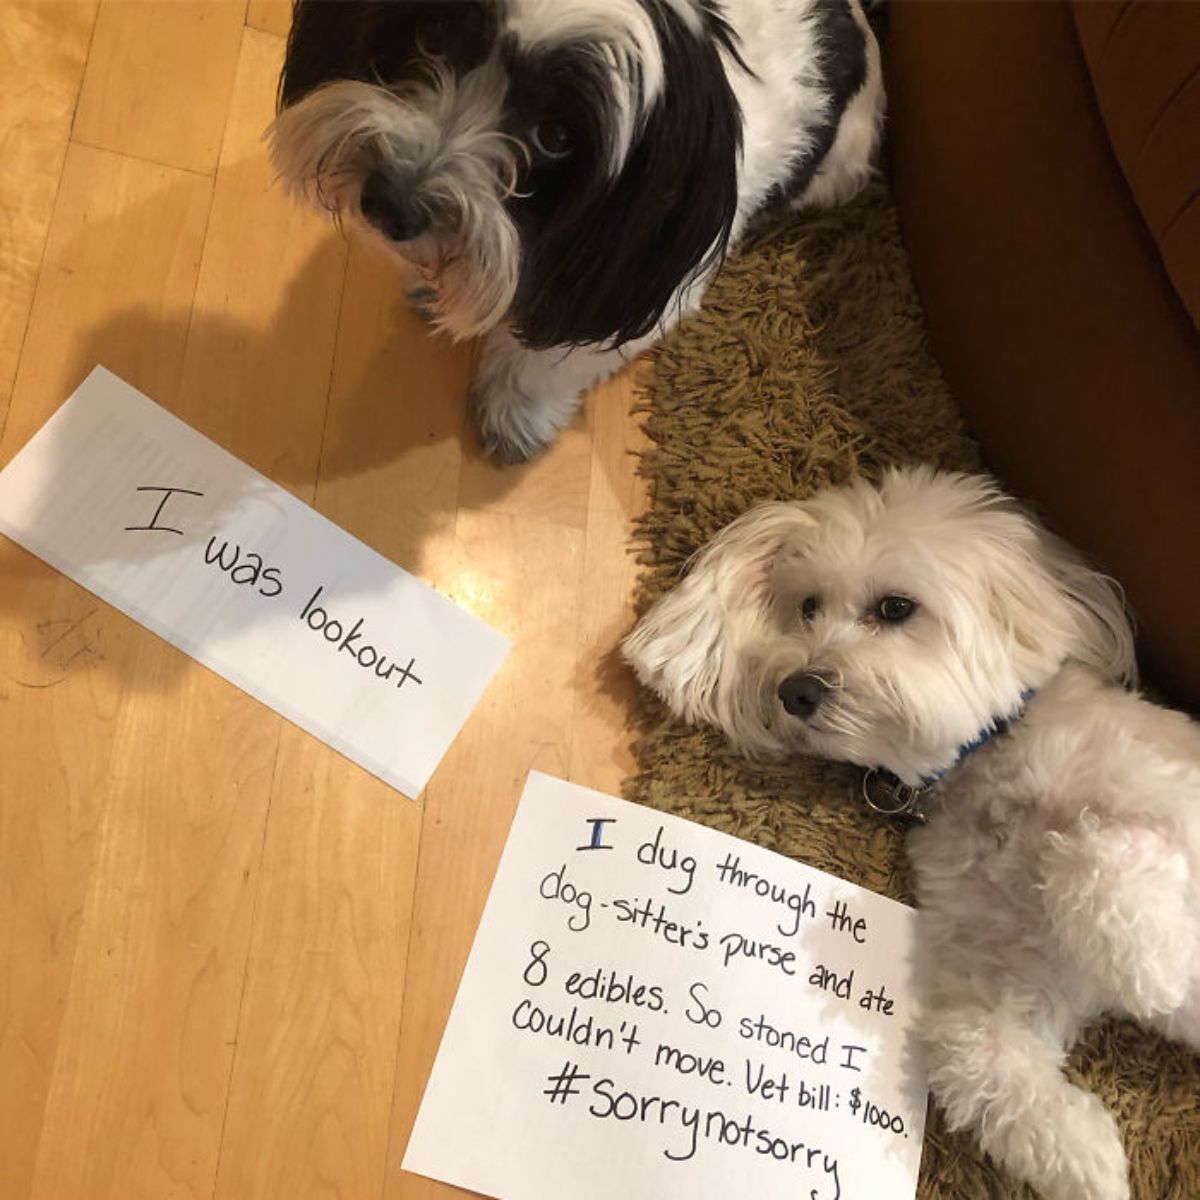 fluffy white dog laying on floor next to fluffy black and white dog standing behind it with the white dog's note saying ate the dogsitter's edibles and the vet bill was $1000 and the other dog's note says "I was lookout"